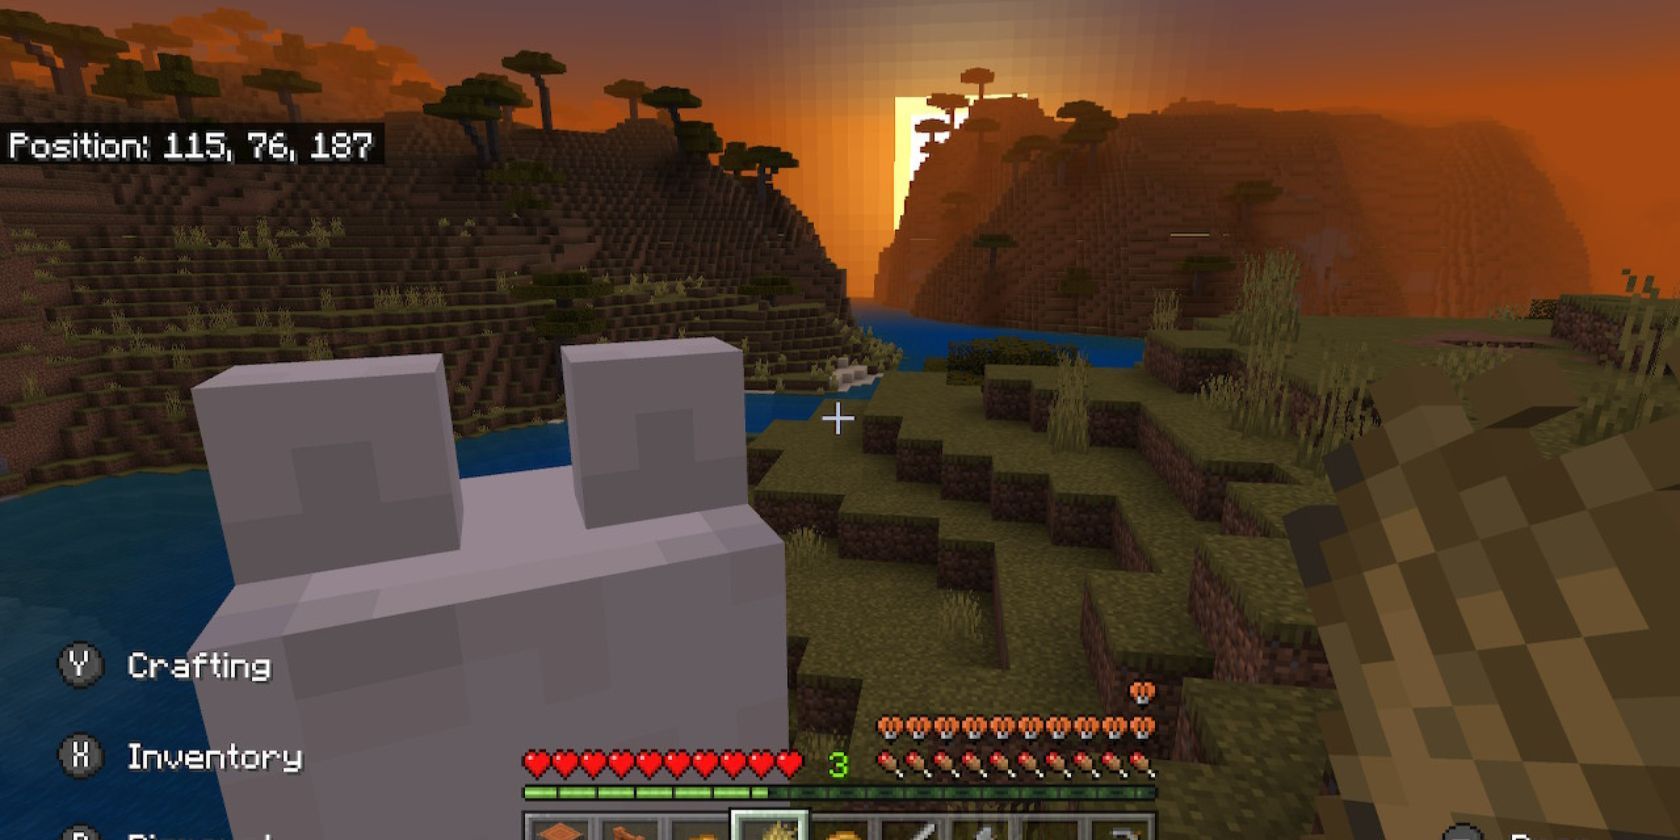 Riding a llama at sunset in Minecraft